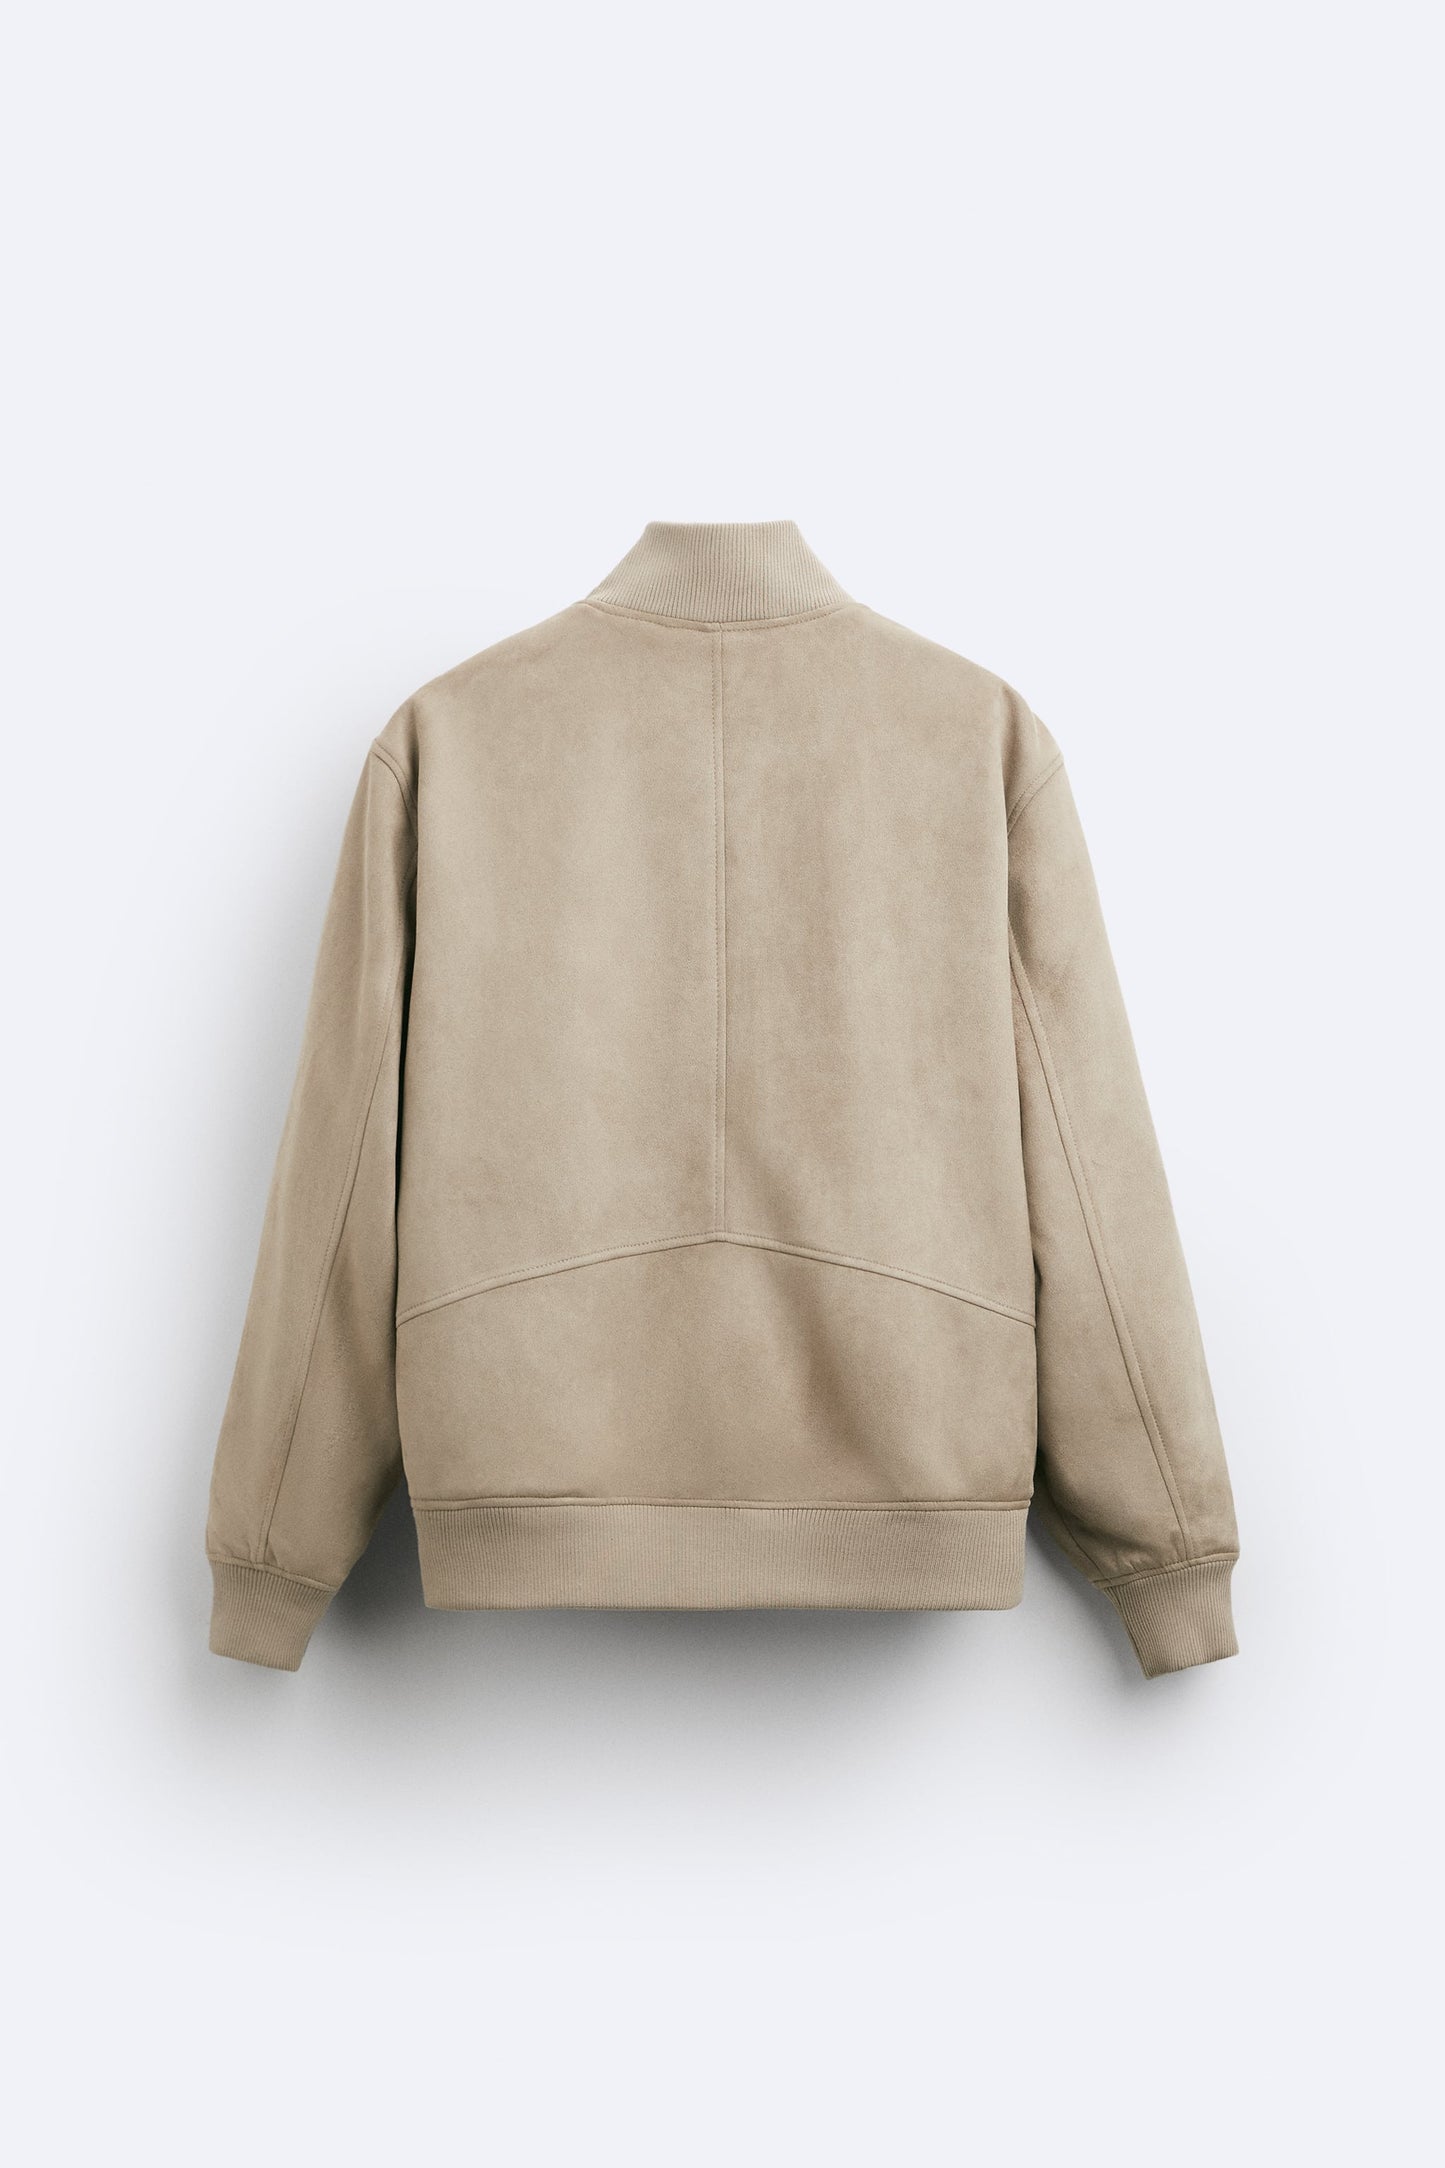 SUEDE LEATHER IVORY JACKET